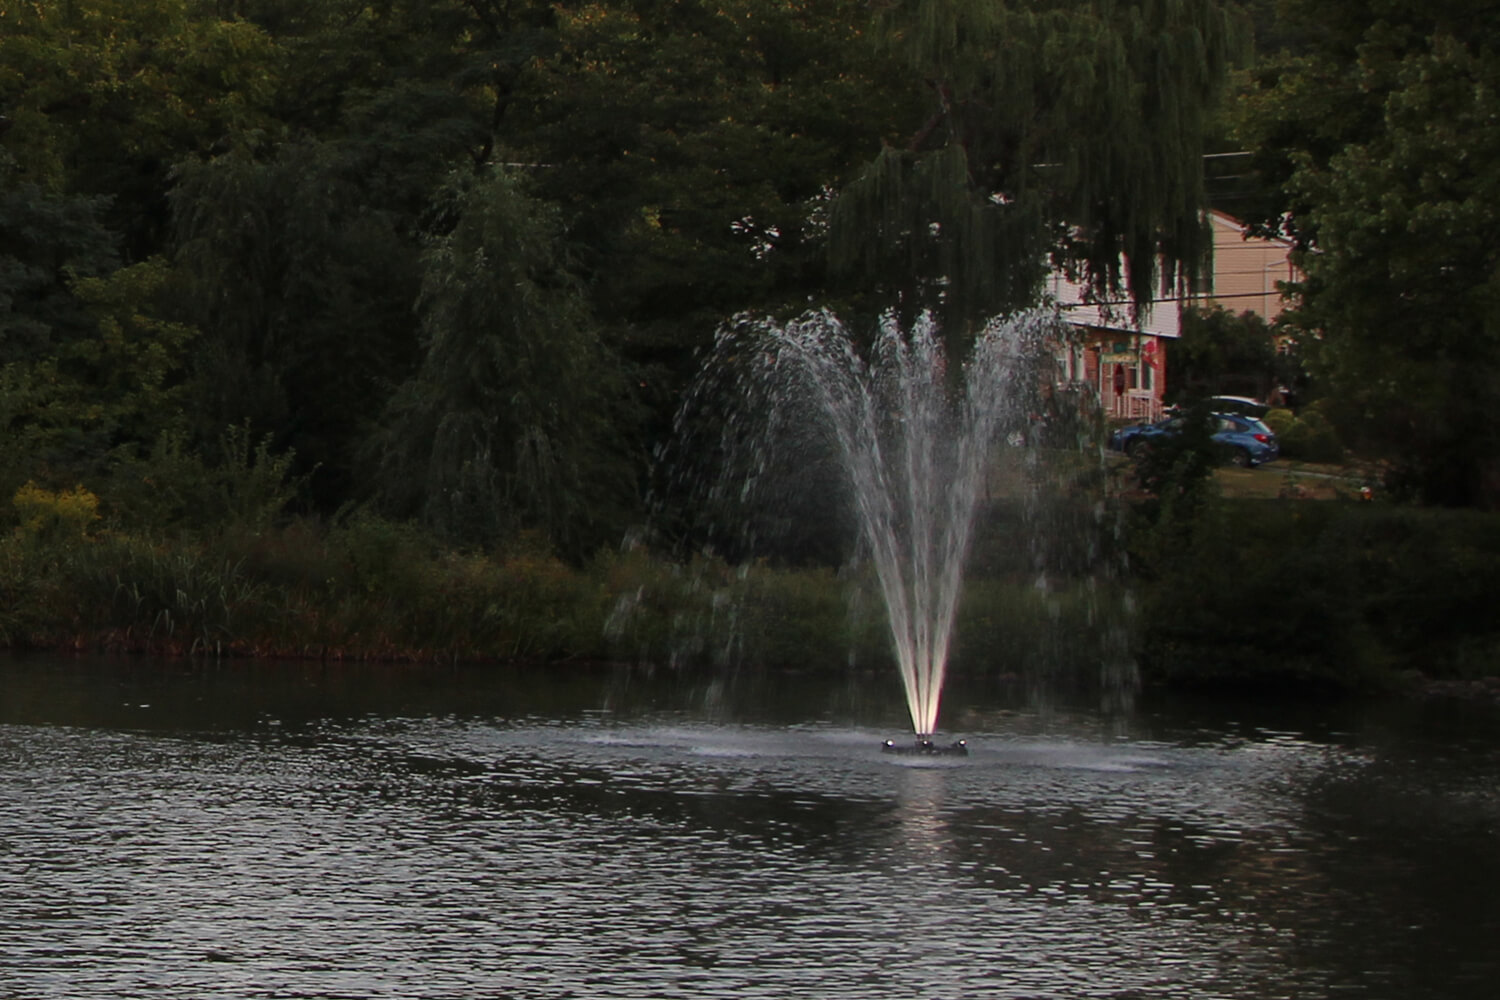 One of Otterbine's Omega Aerating Arch Fountains